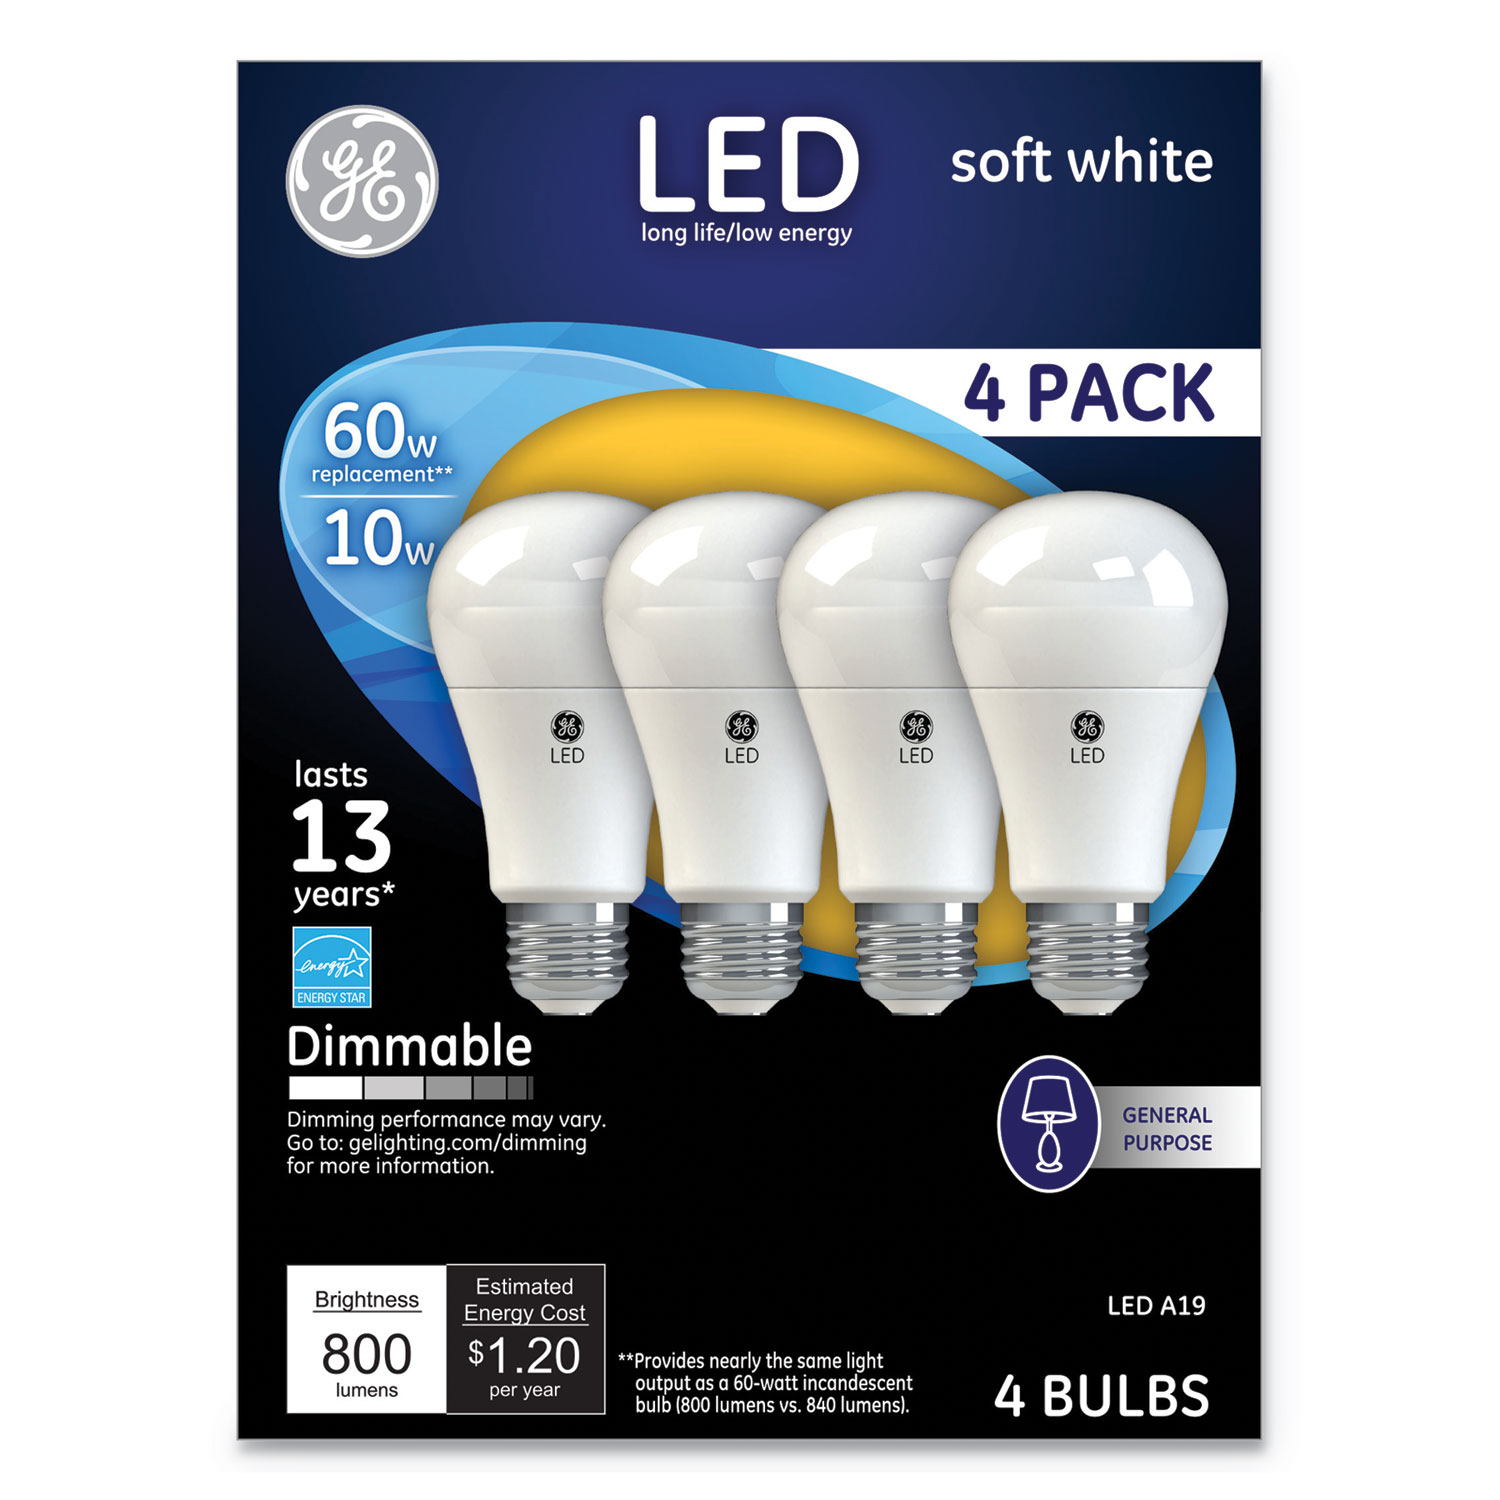  GE 67615 LED Soft White A19 Dimmable Light Bulb, 10 W, 4/Pack (GEL67615) 